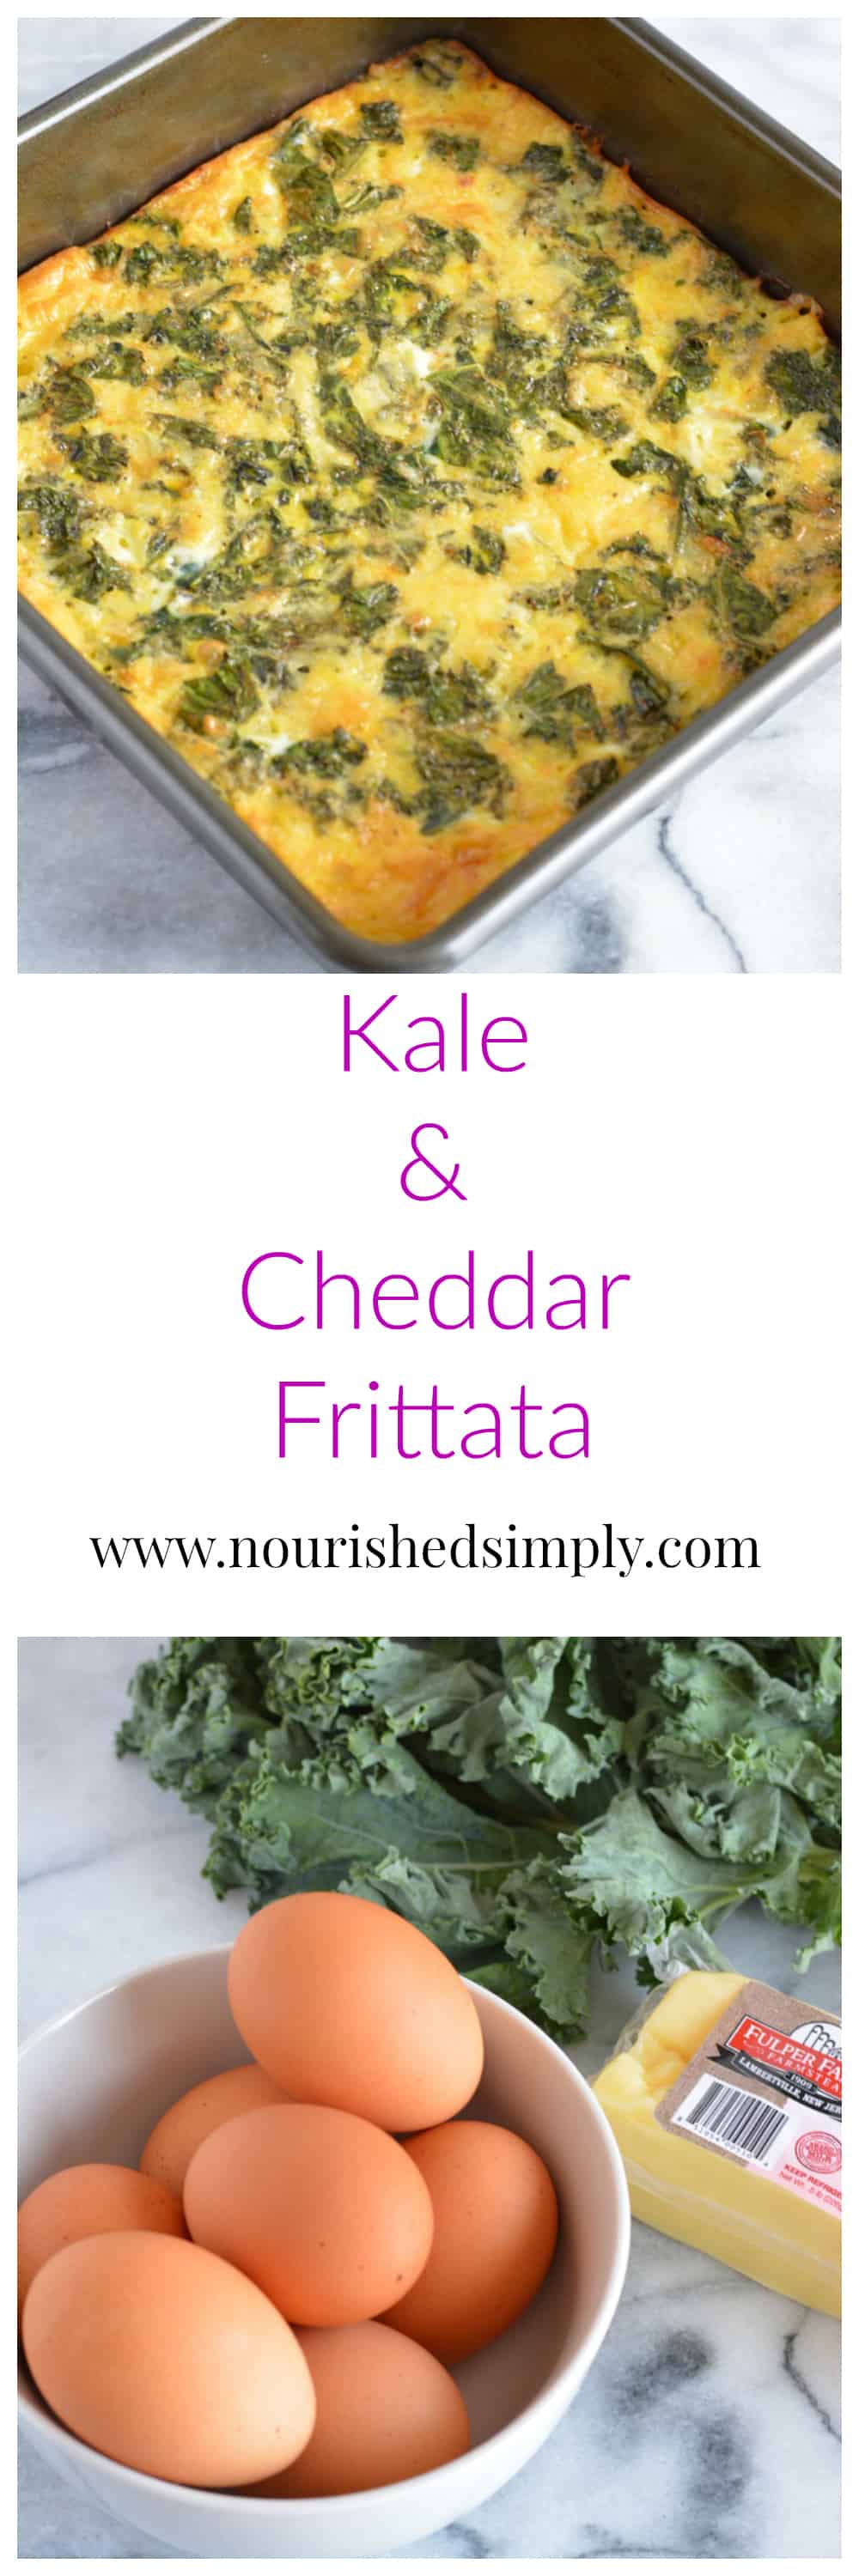 Kale and Cheddar Frittata